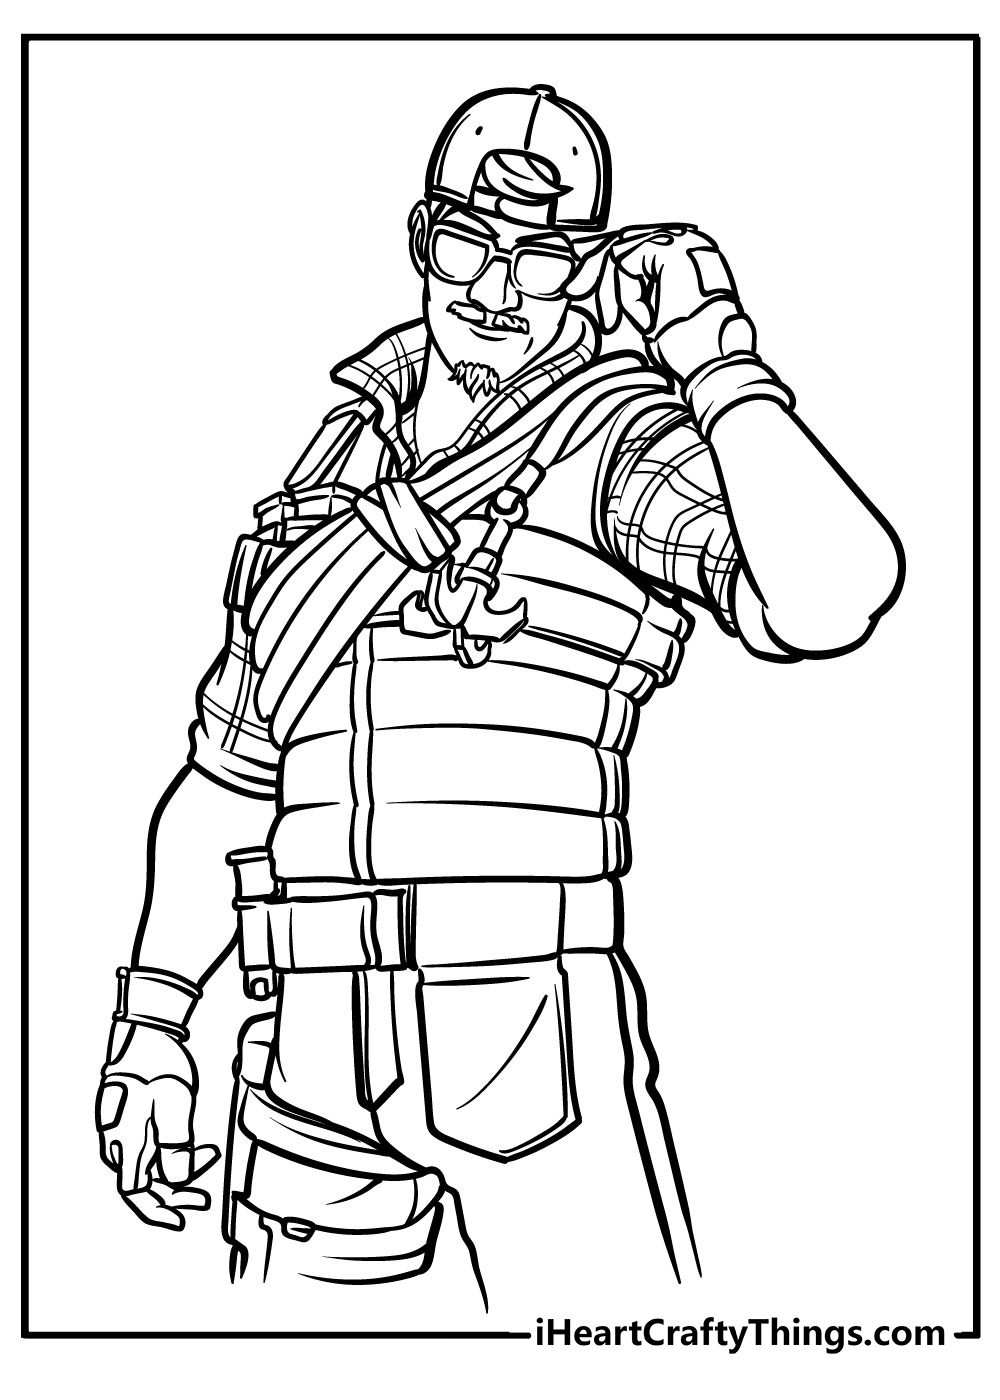 simple Fortnite Coloring Pages free download